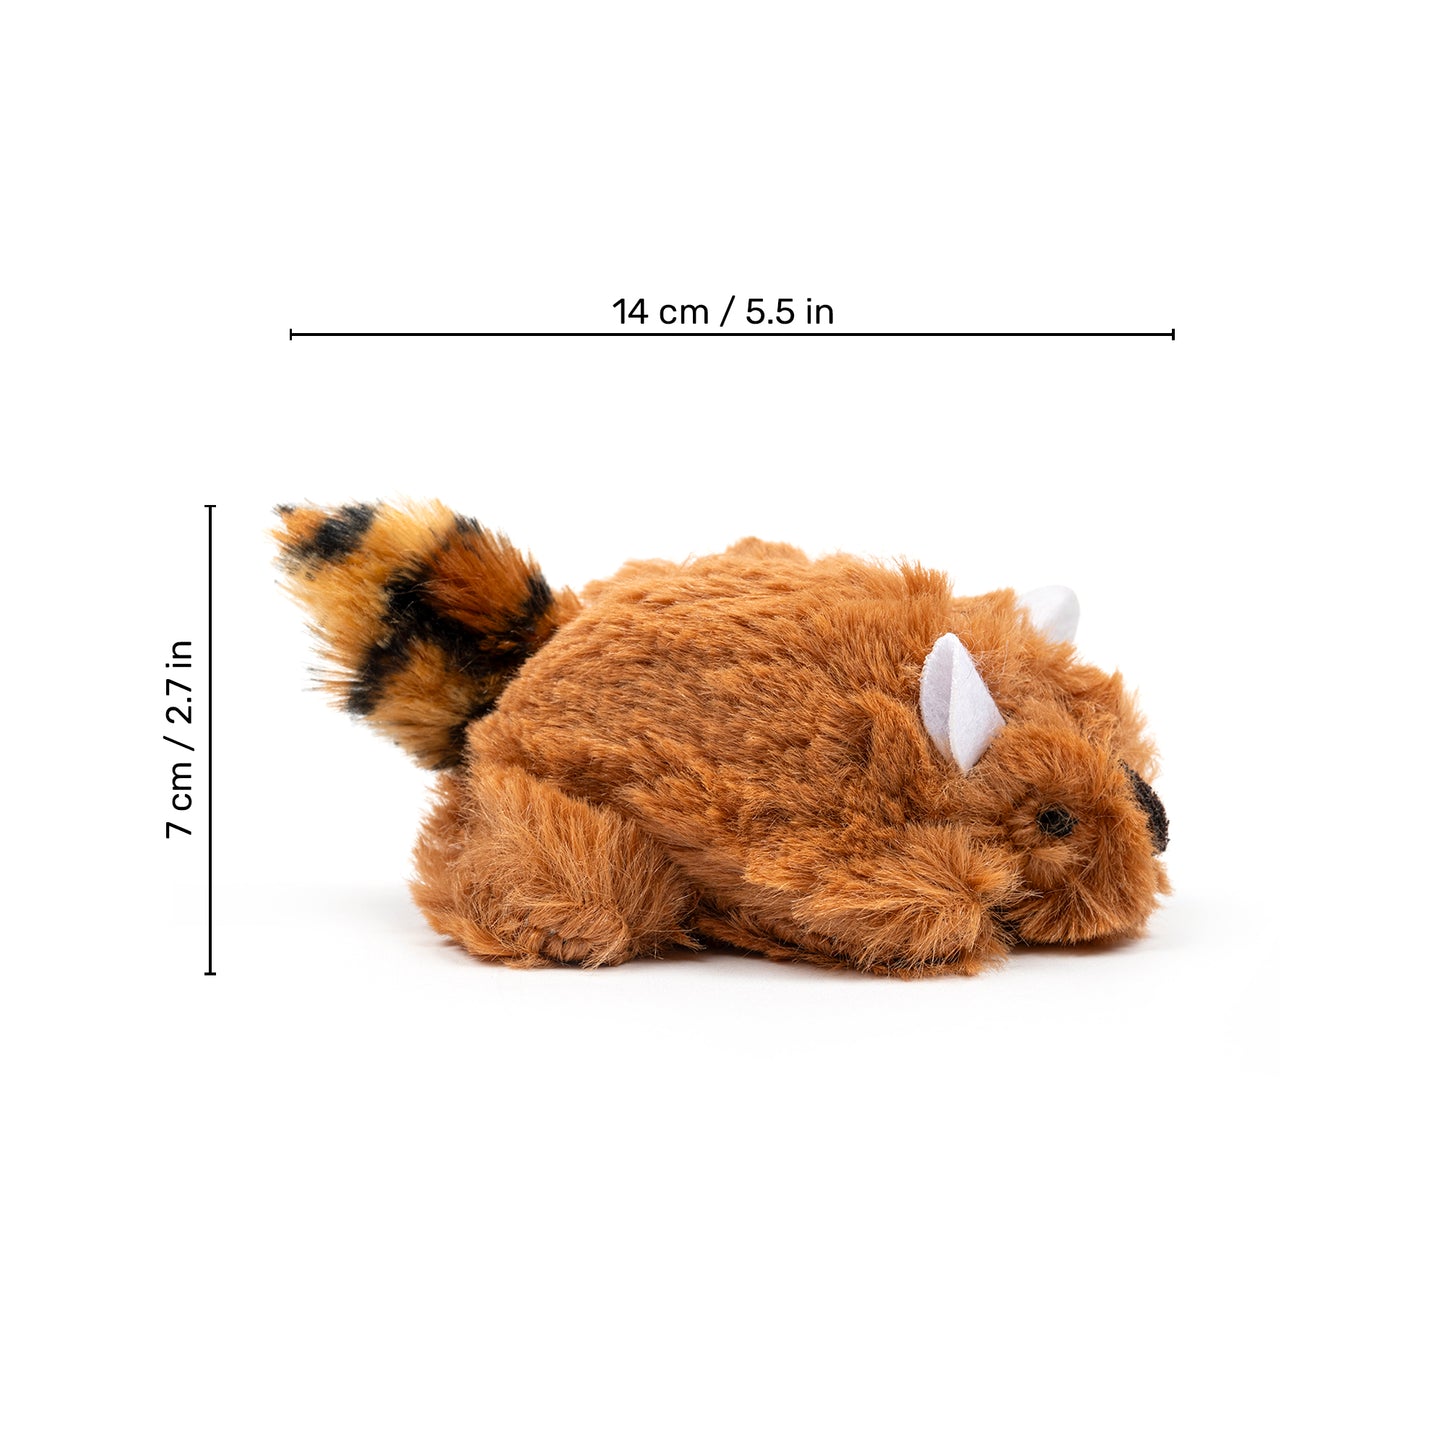 HUFT Squeaktail Interactive (With Catnip Inside) Cat Toy_05